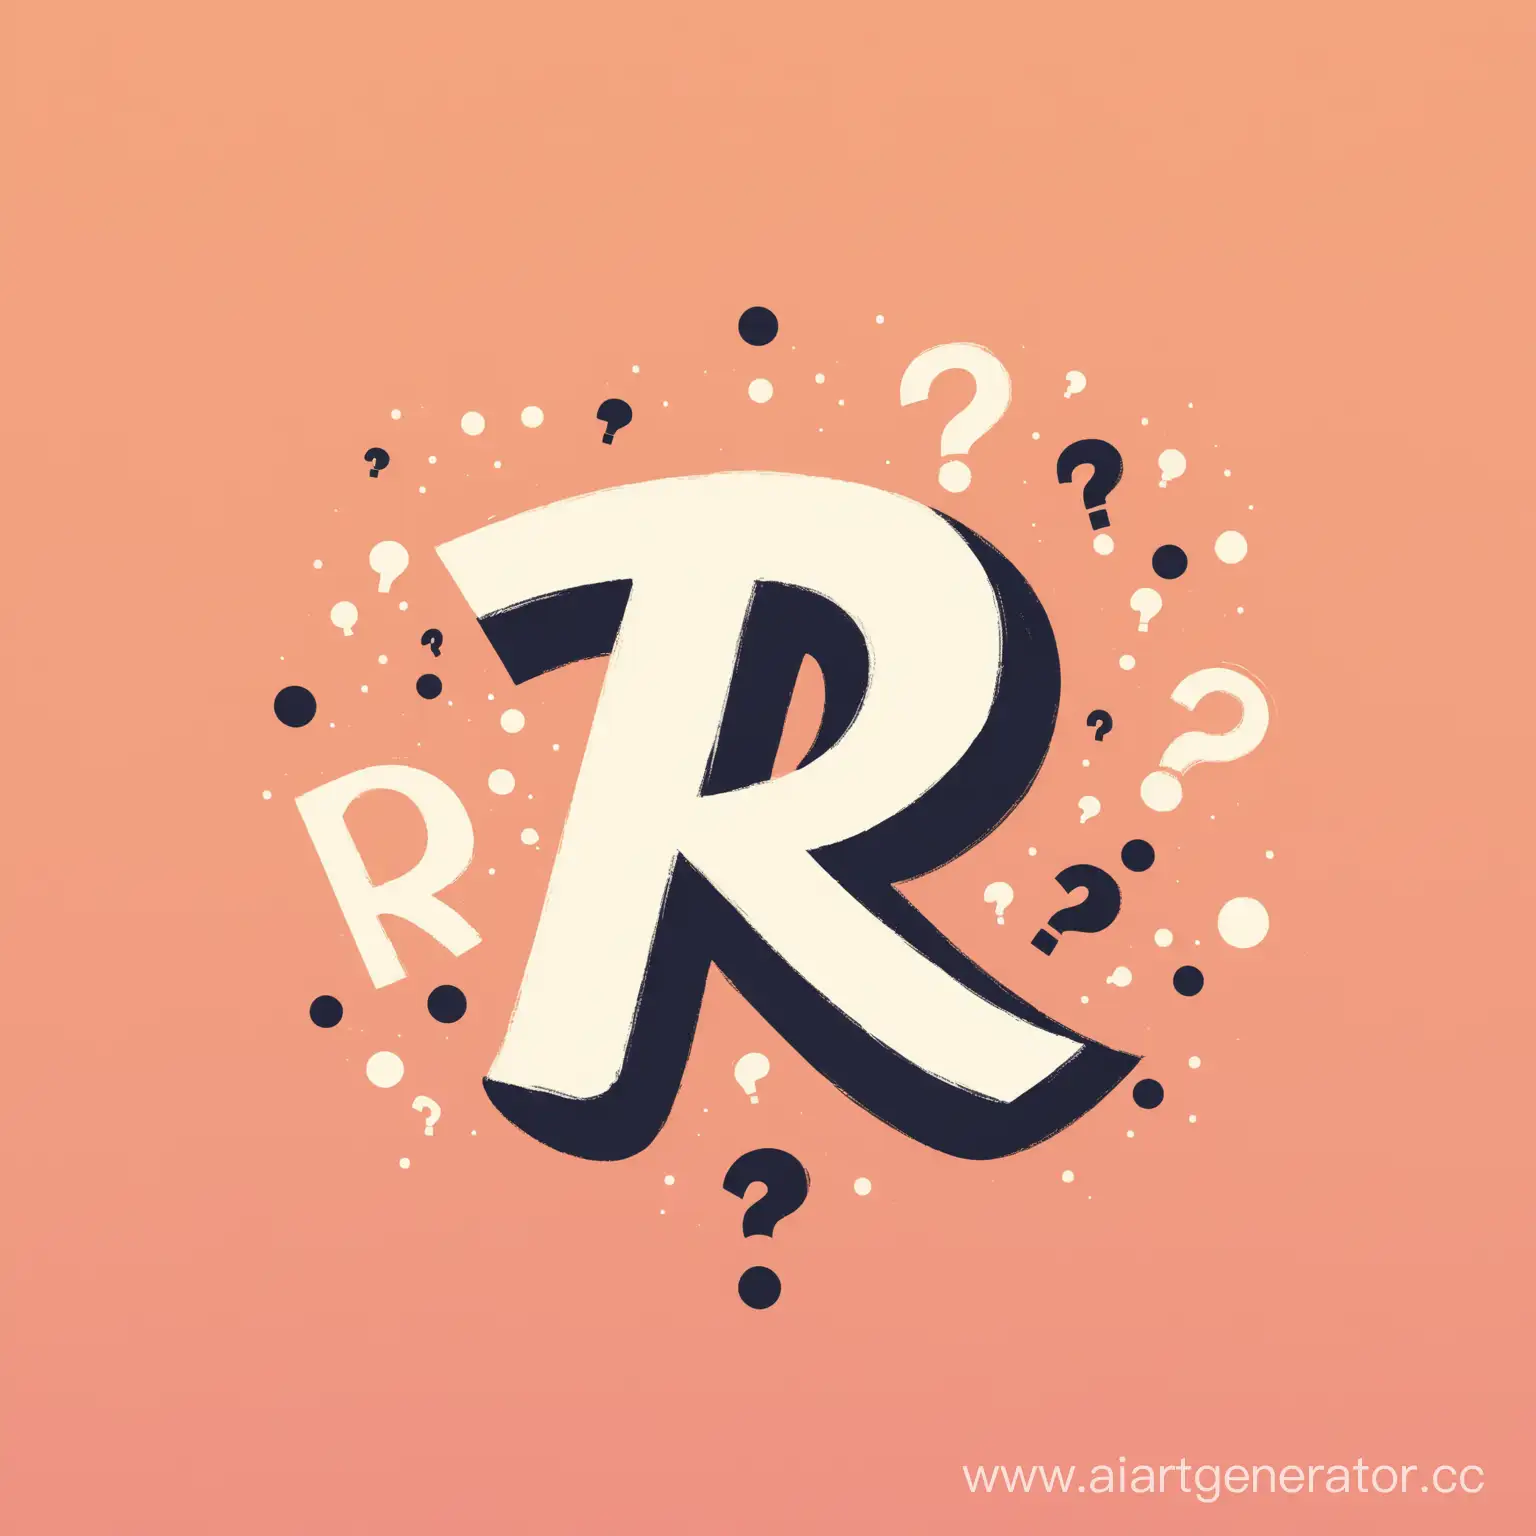 Mysterious-RLogo-with-Question-Marks